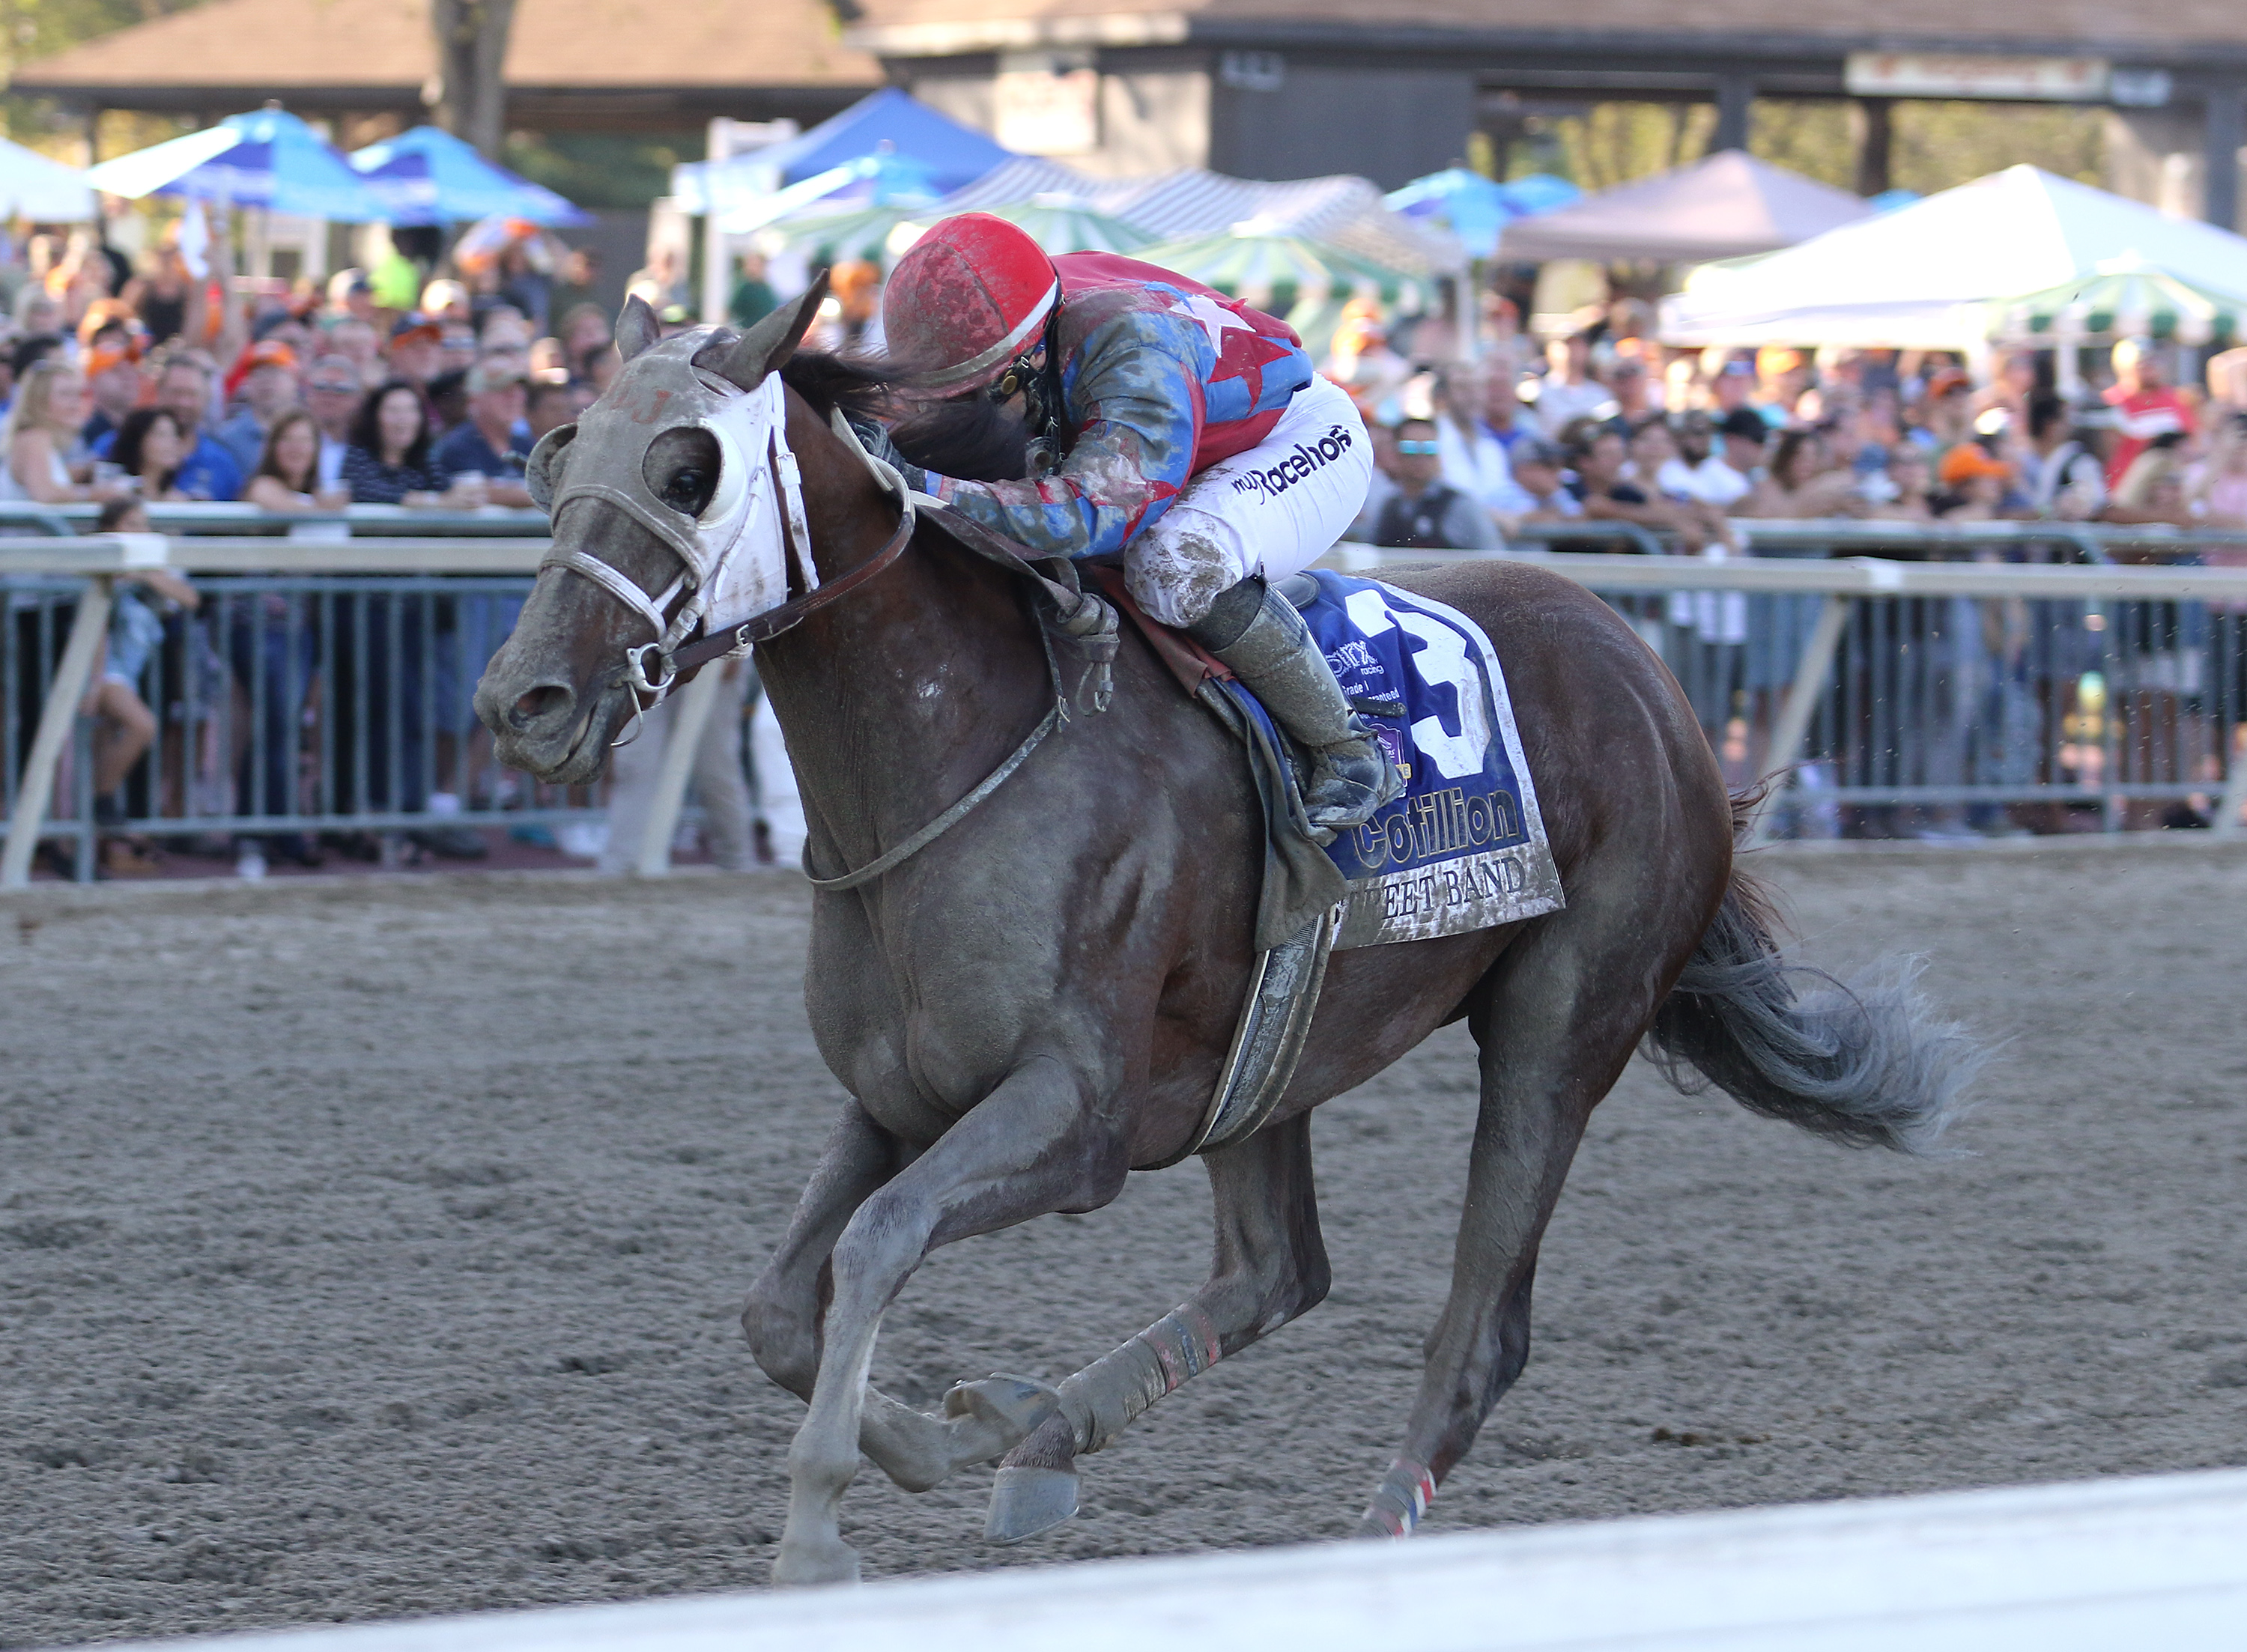 Sophie Doyle winning the G1 Cotillion Stakes at Parx Racing in 2019: “She has developed a great clock in her head,” says her brother. “Her tactics from what I see in the big races are on point.” Photo: Bill Denver/Equi-Photo